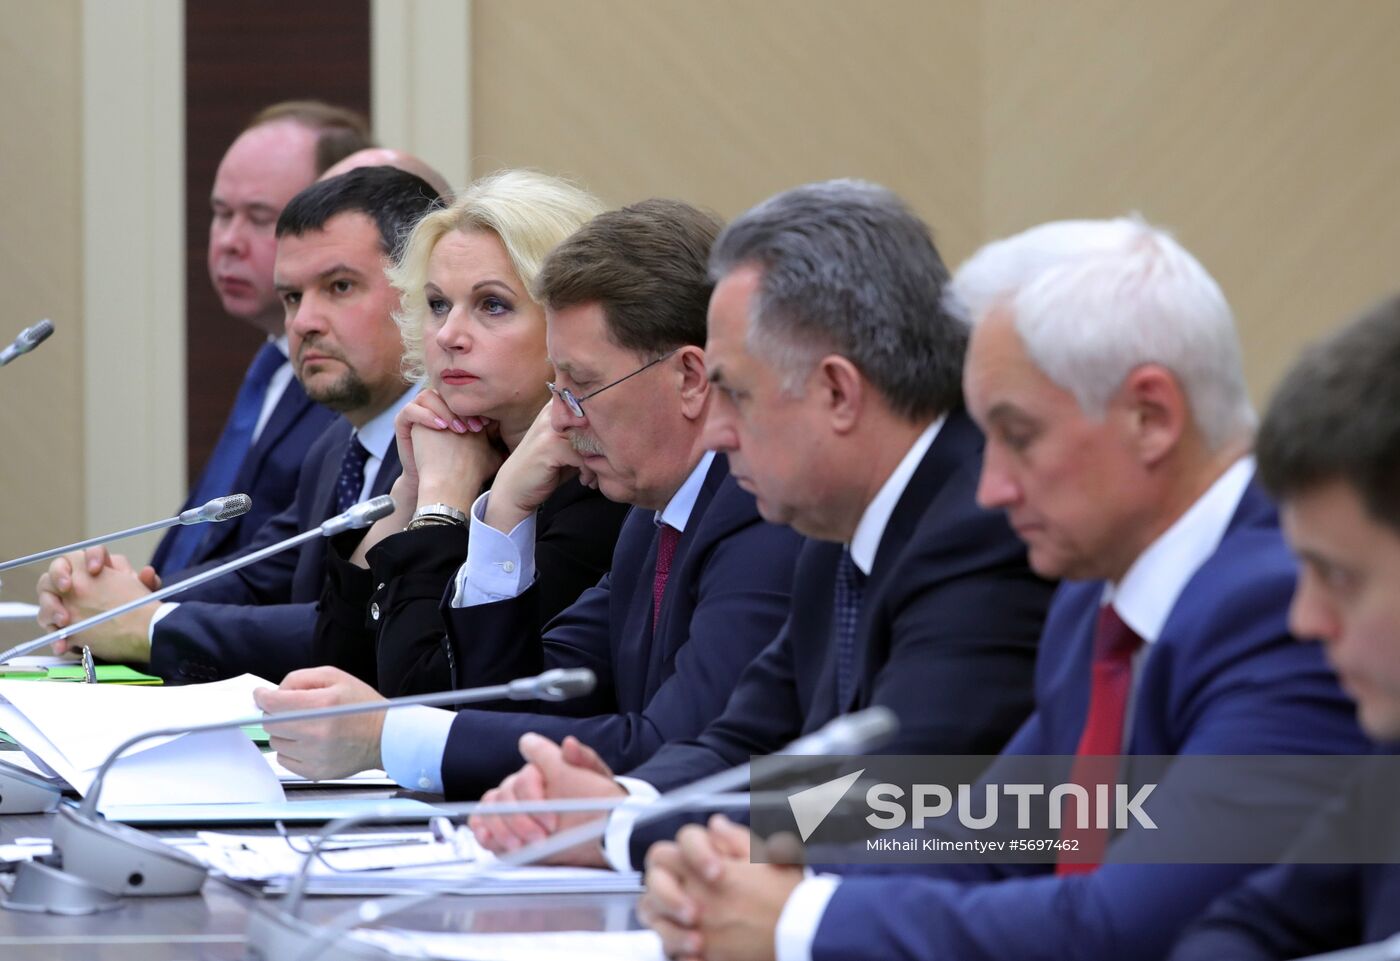 President Putin chairs meeting with government members